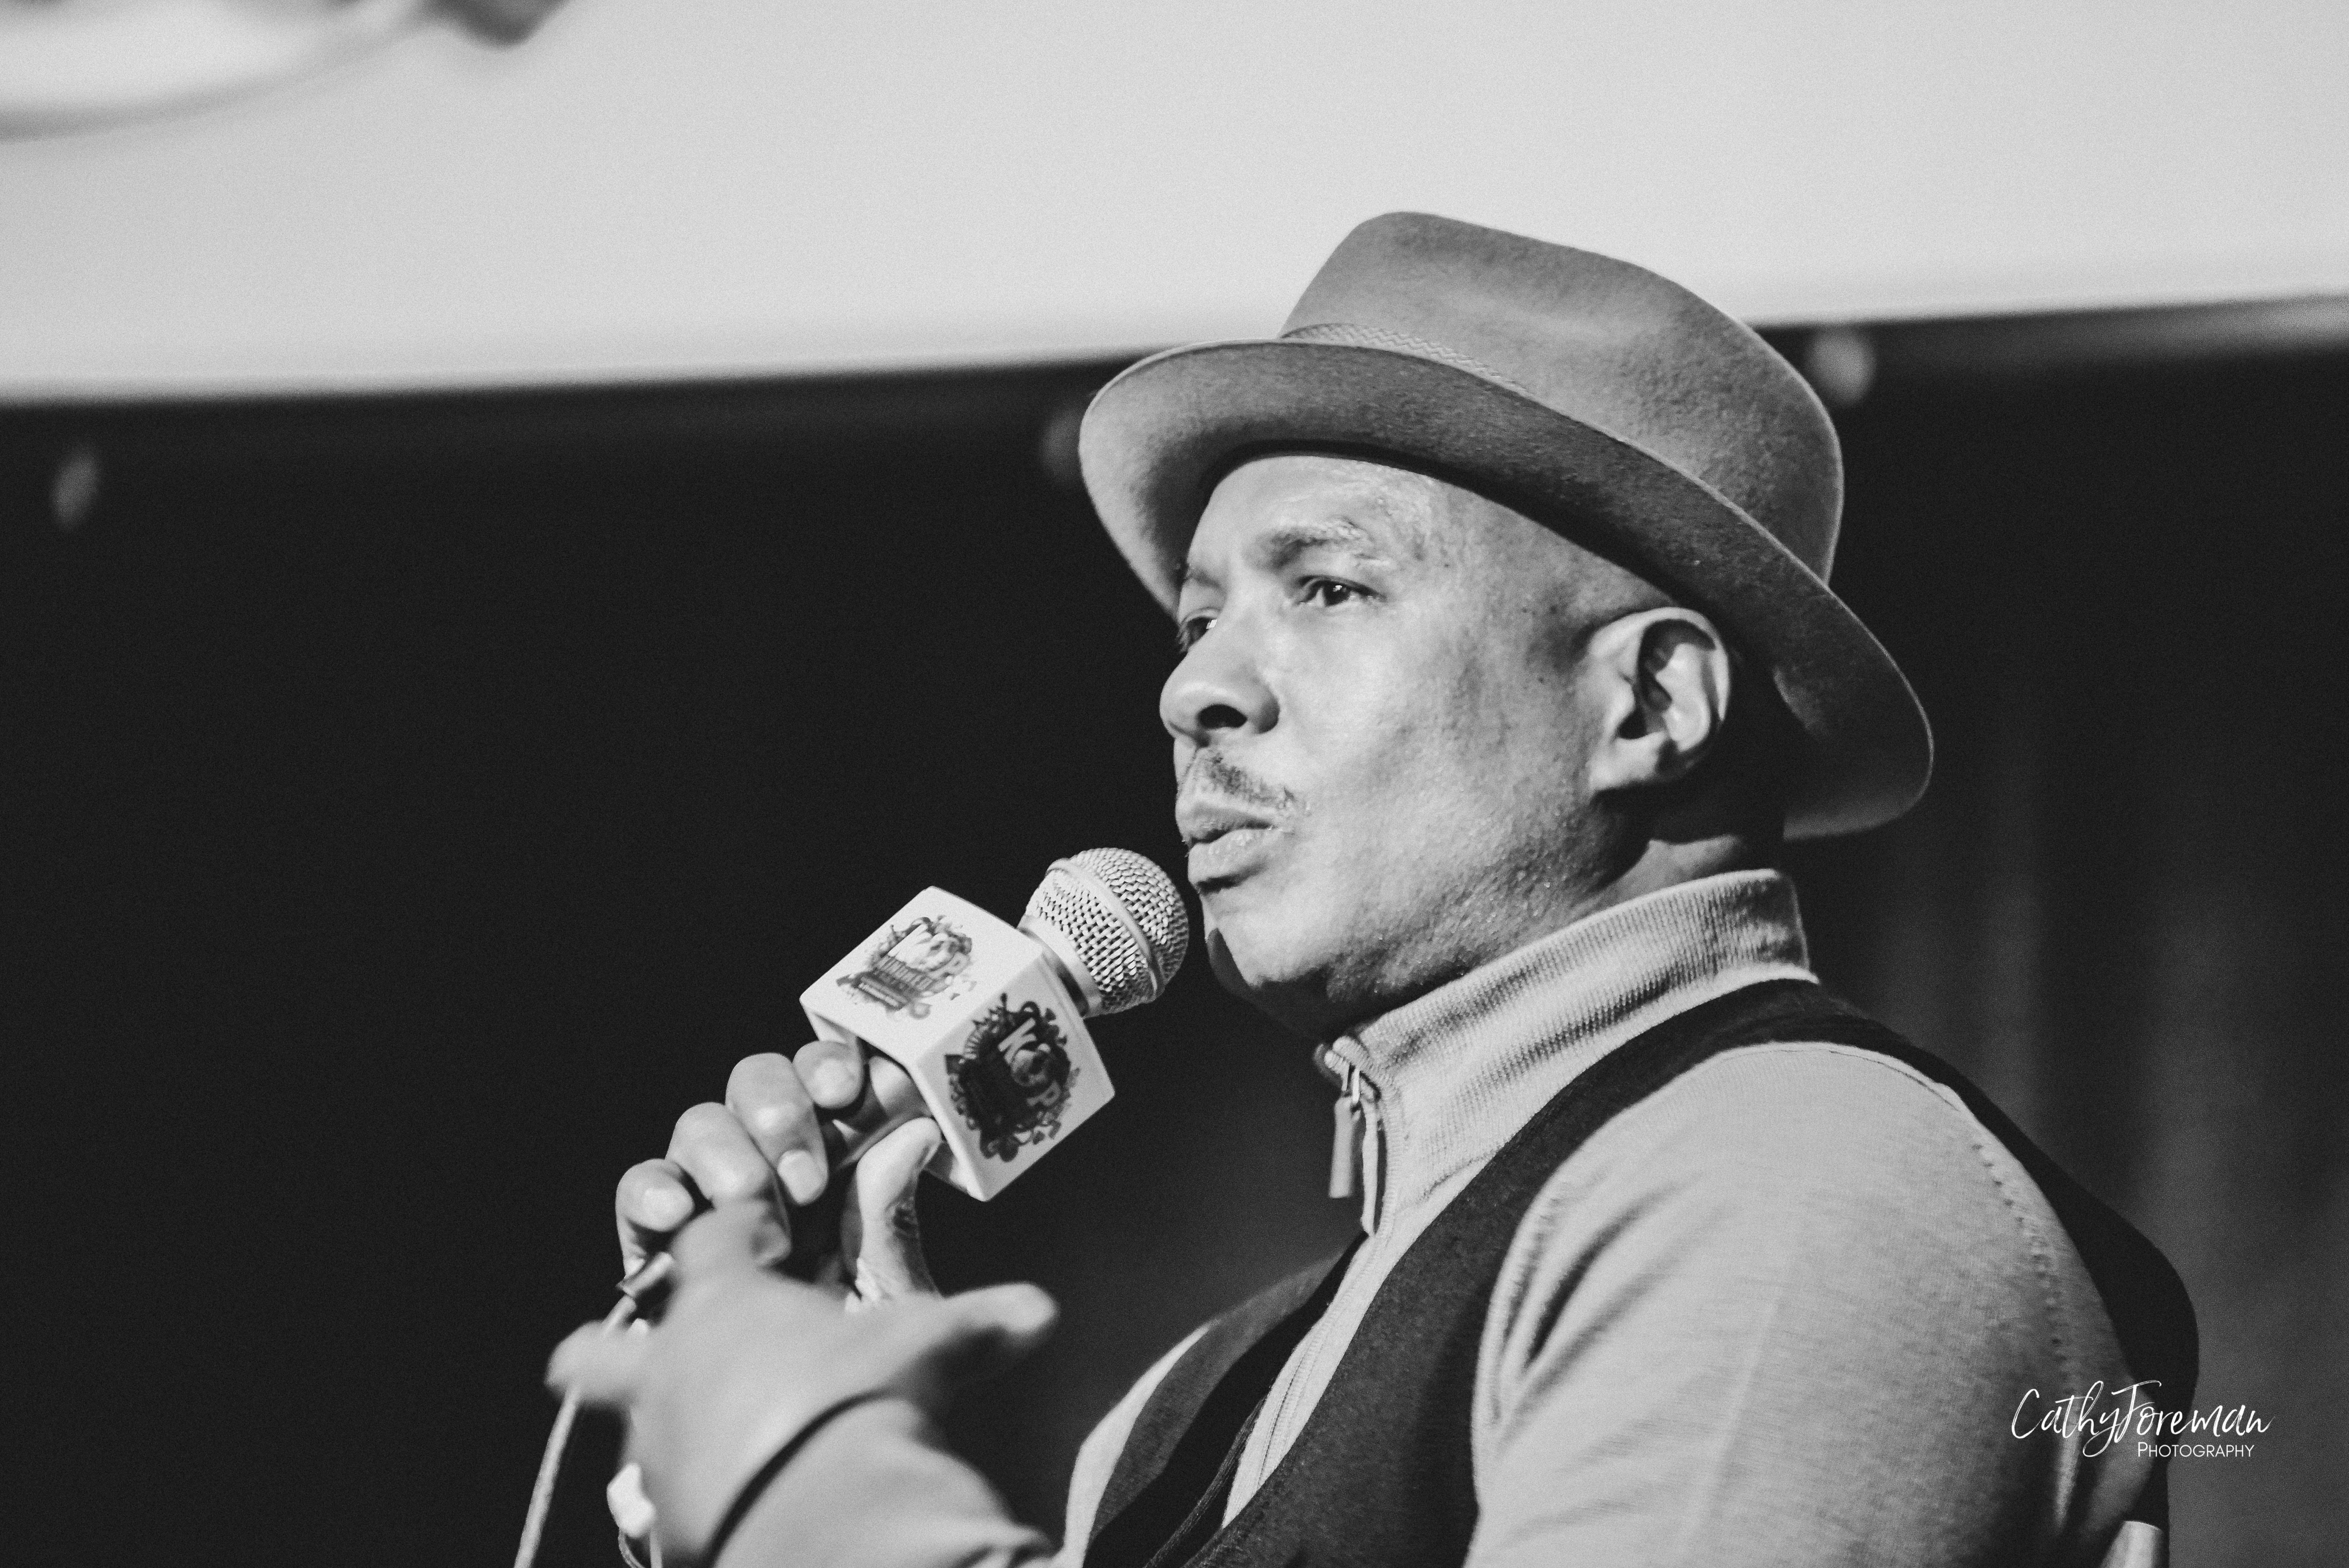 ray chew at kindred presents. image by cathy foreman